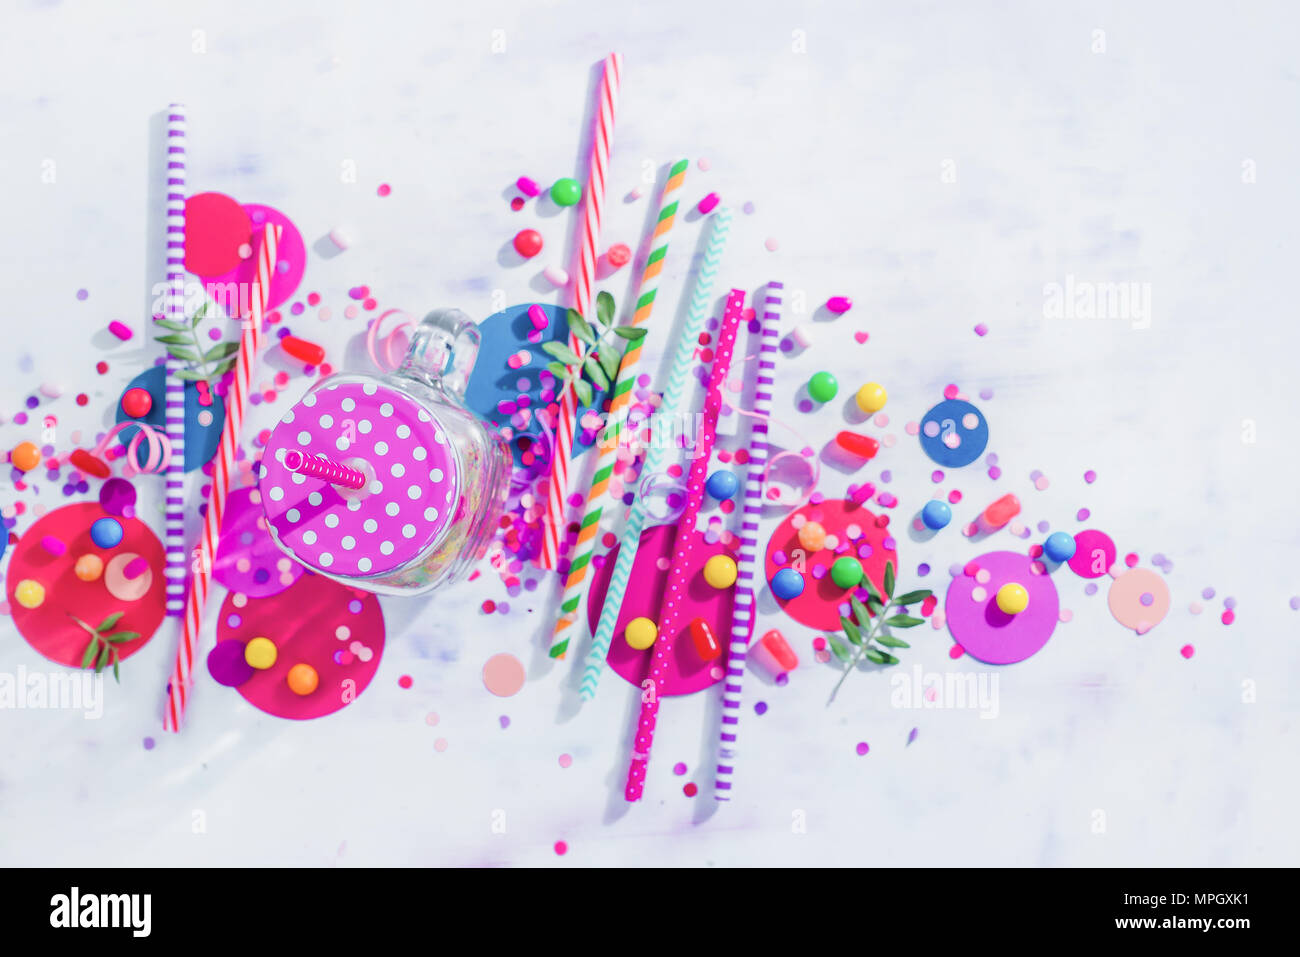 Holiday frame or background with colorful straws, confetti and hard candy. Birthday or party greeting card flat lay with copy space. Stock Photo